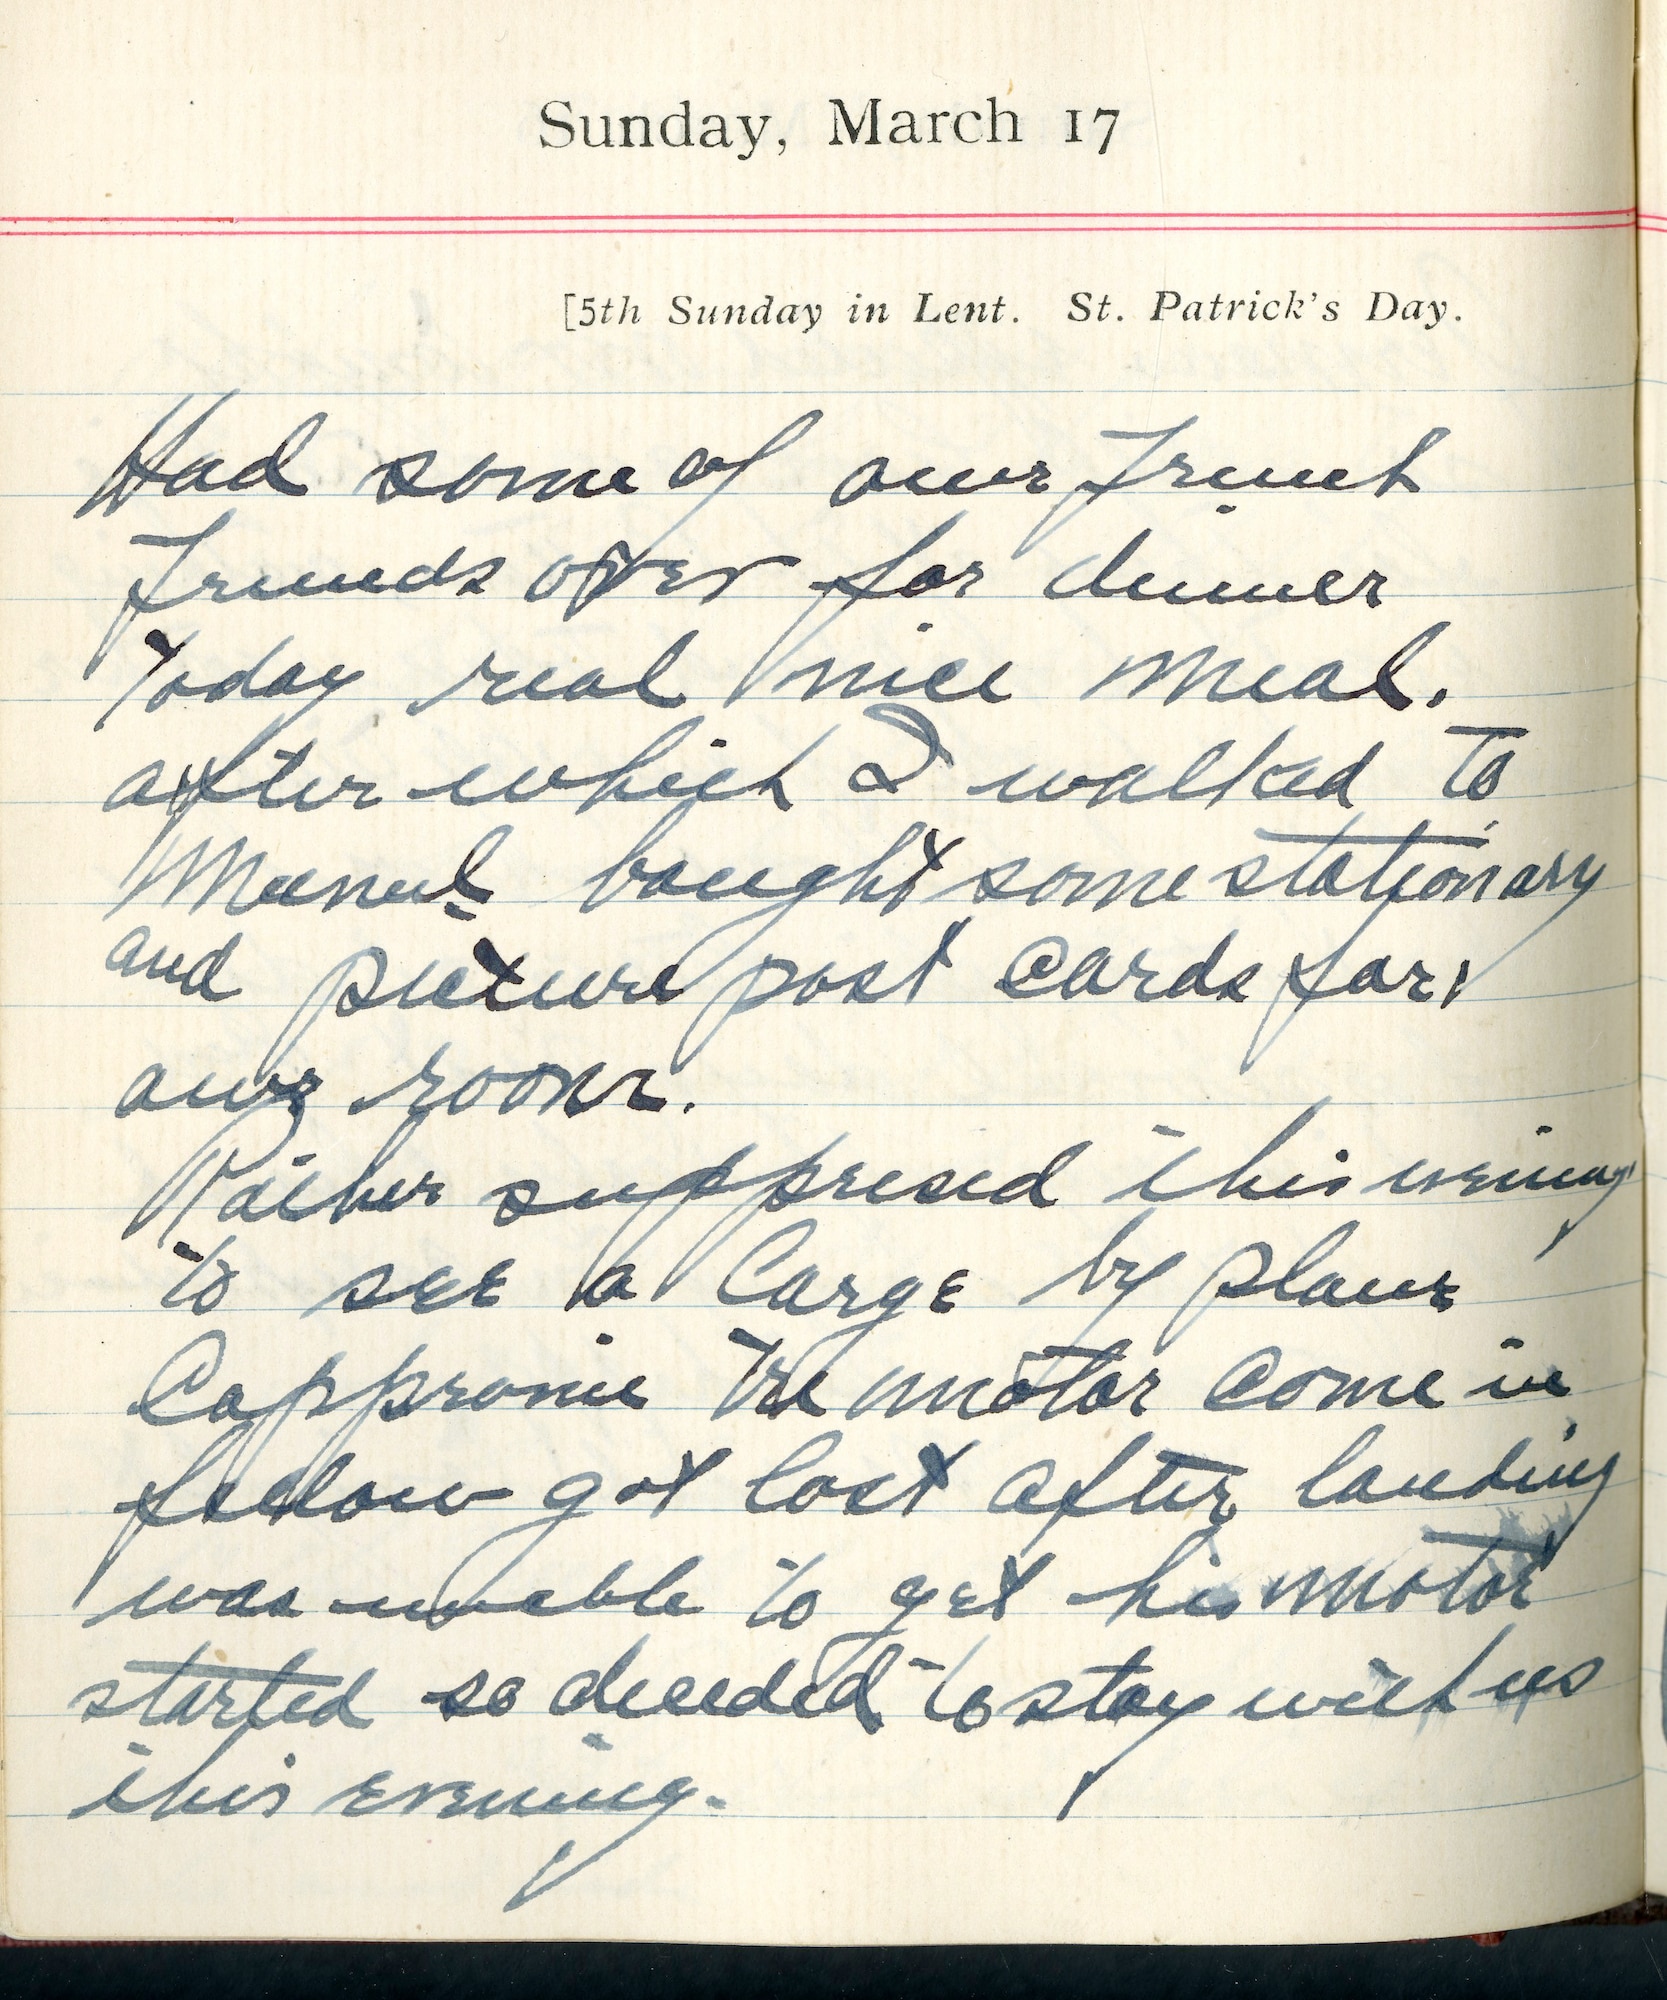 Capt. Edward V. Rickenbacker's 1918 wartime diary entry. (03/17/1918).

Had some of our French friends over for dinner today.  Real nice meal, after which I walked to Mesnil.  I bought some stationary and picture post cards for our room.

Rather surprised this evening to see a large biplace Caproni trimotor come in.  Fellow got lost after landing, was unable to get his motor started, so decided to stay with us this evening.